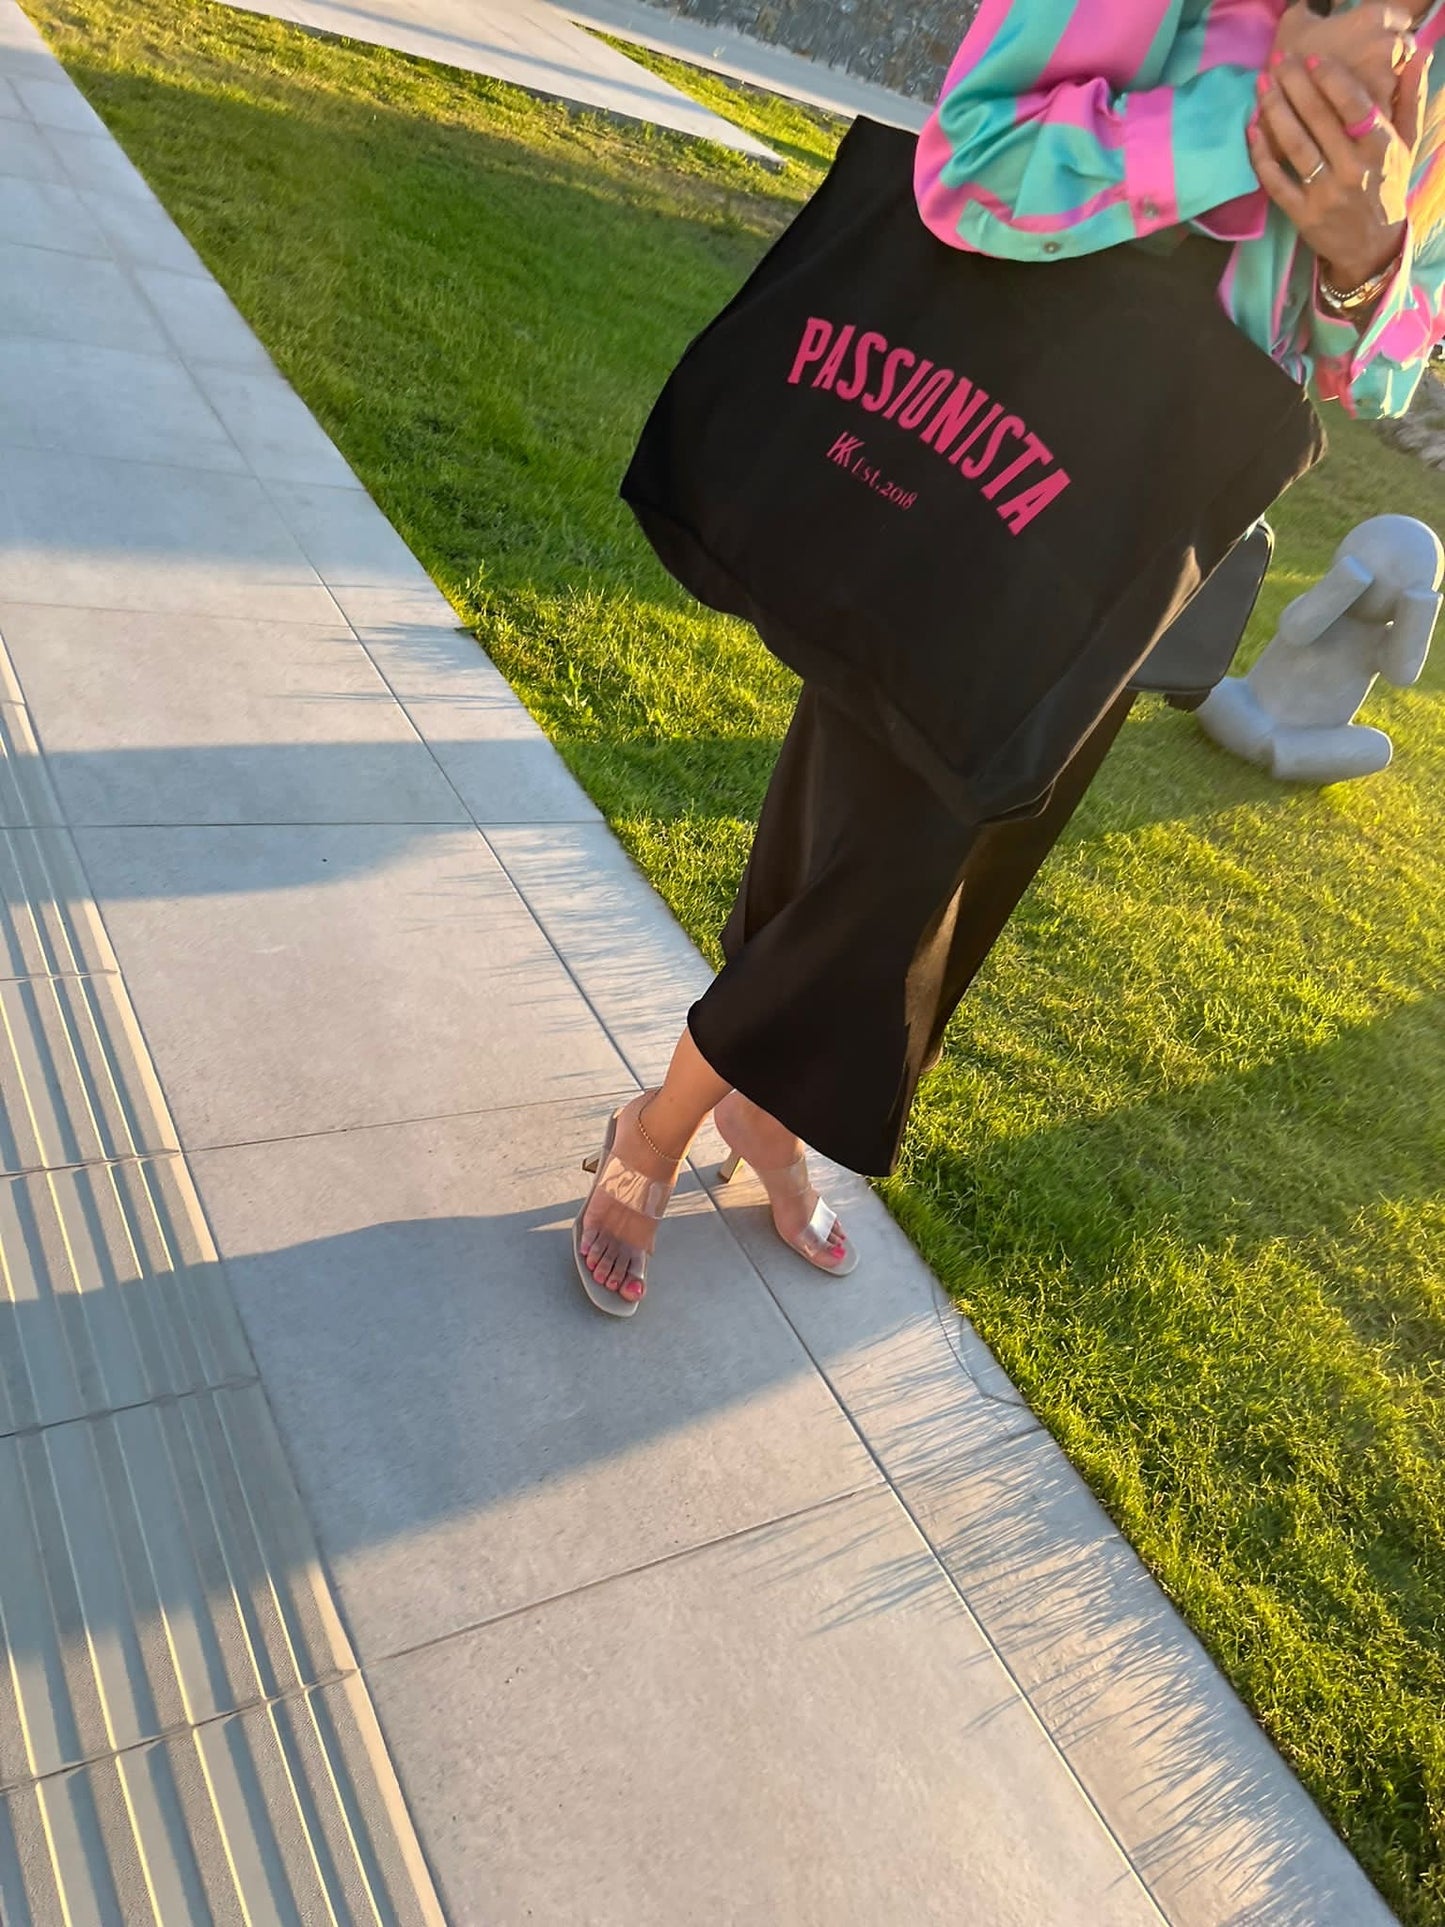 XL SHOPPING BAG  ' PASSIONISTA '